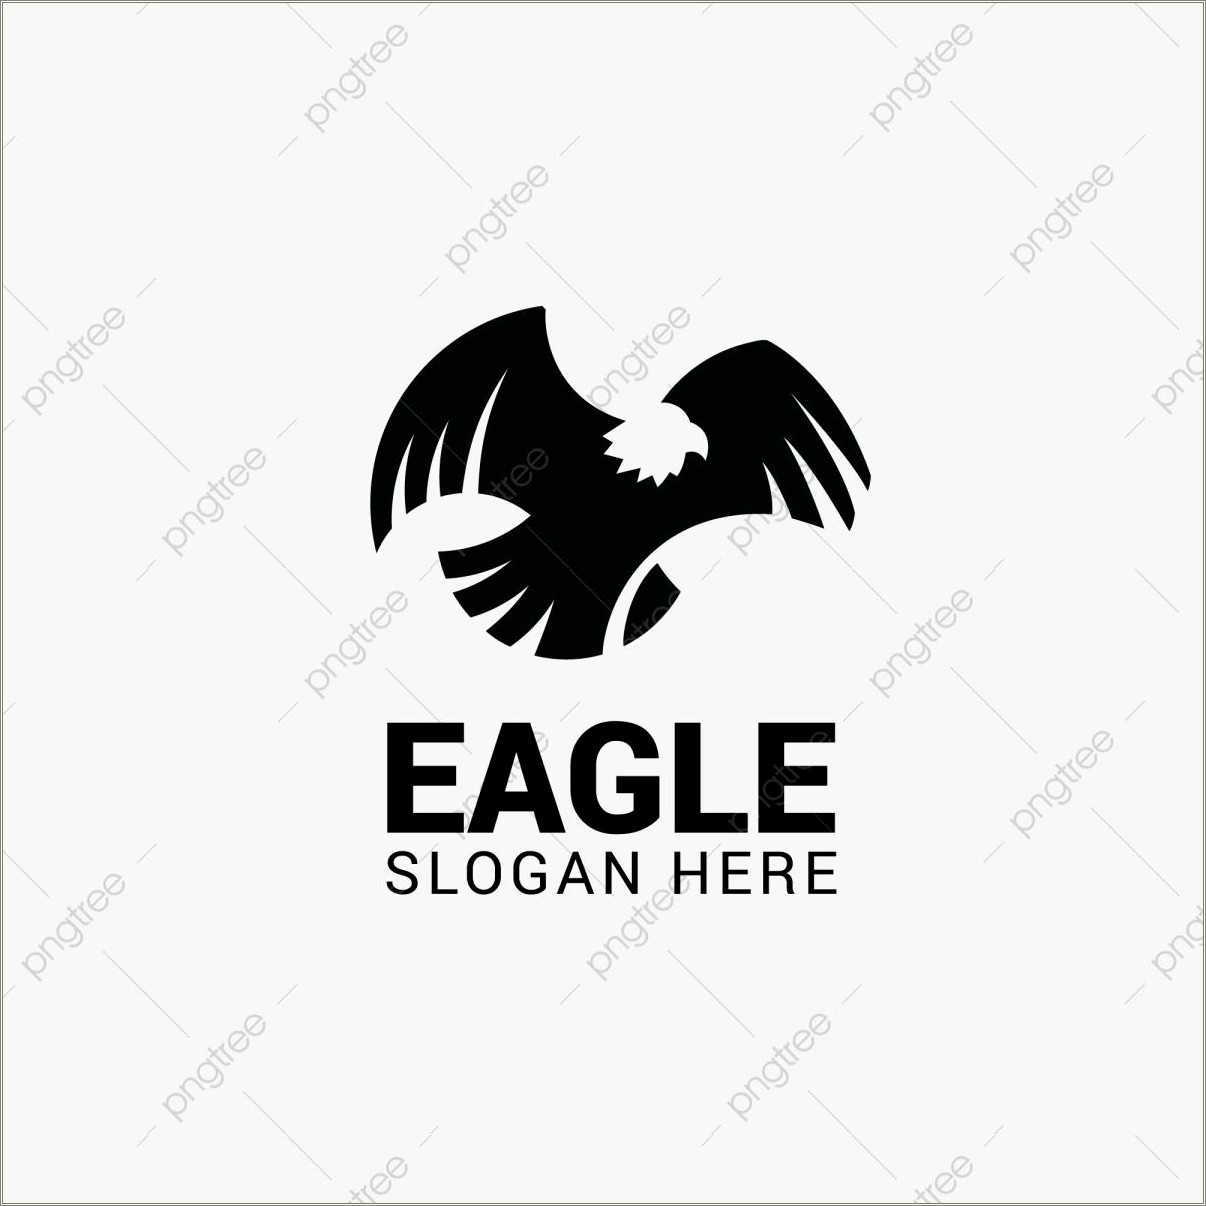 Free Certificate Templates With An Eagle Logo